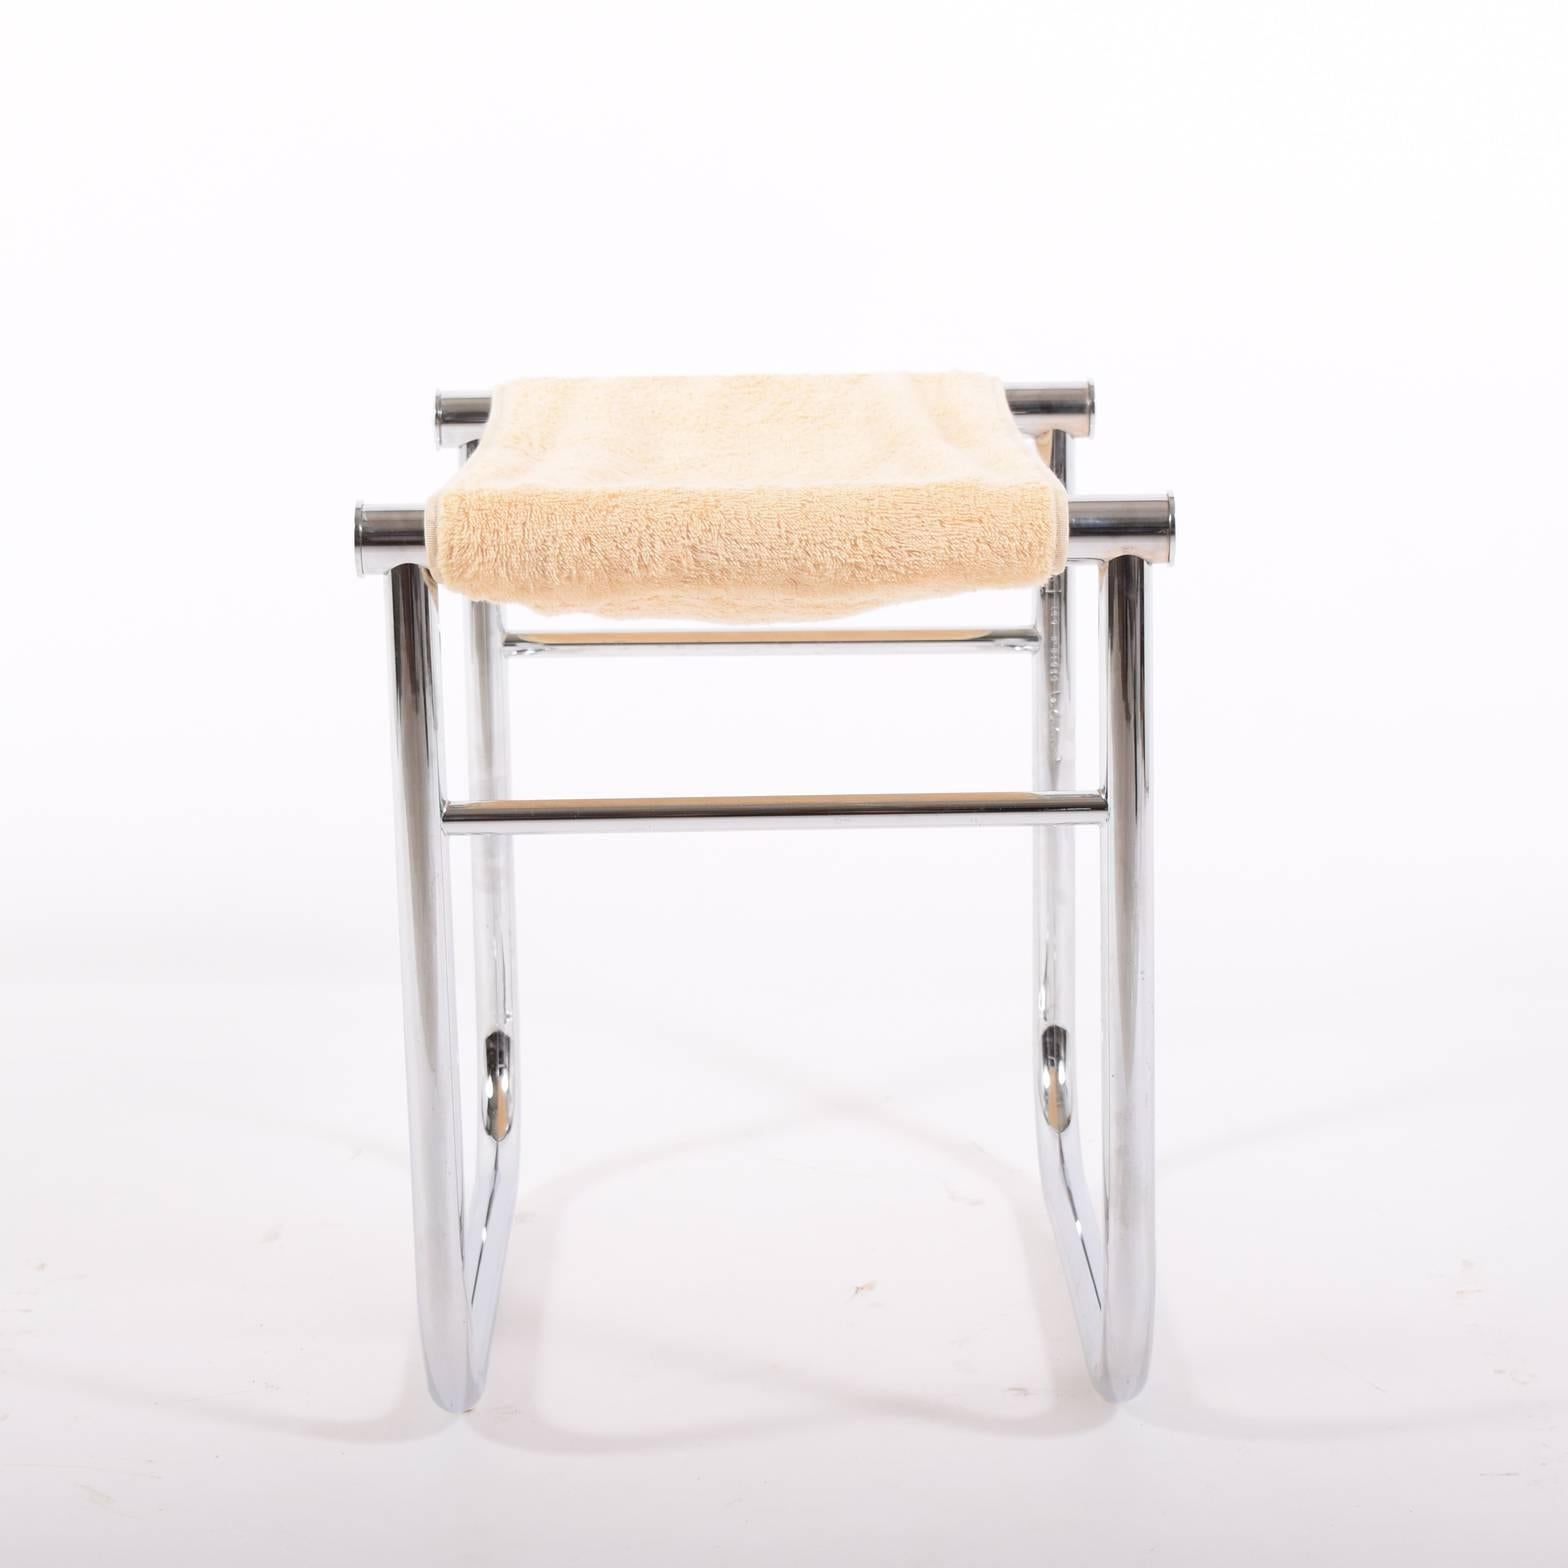 Chrome tubular metal frame seat with removable beige towelling, Signed.